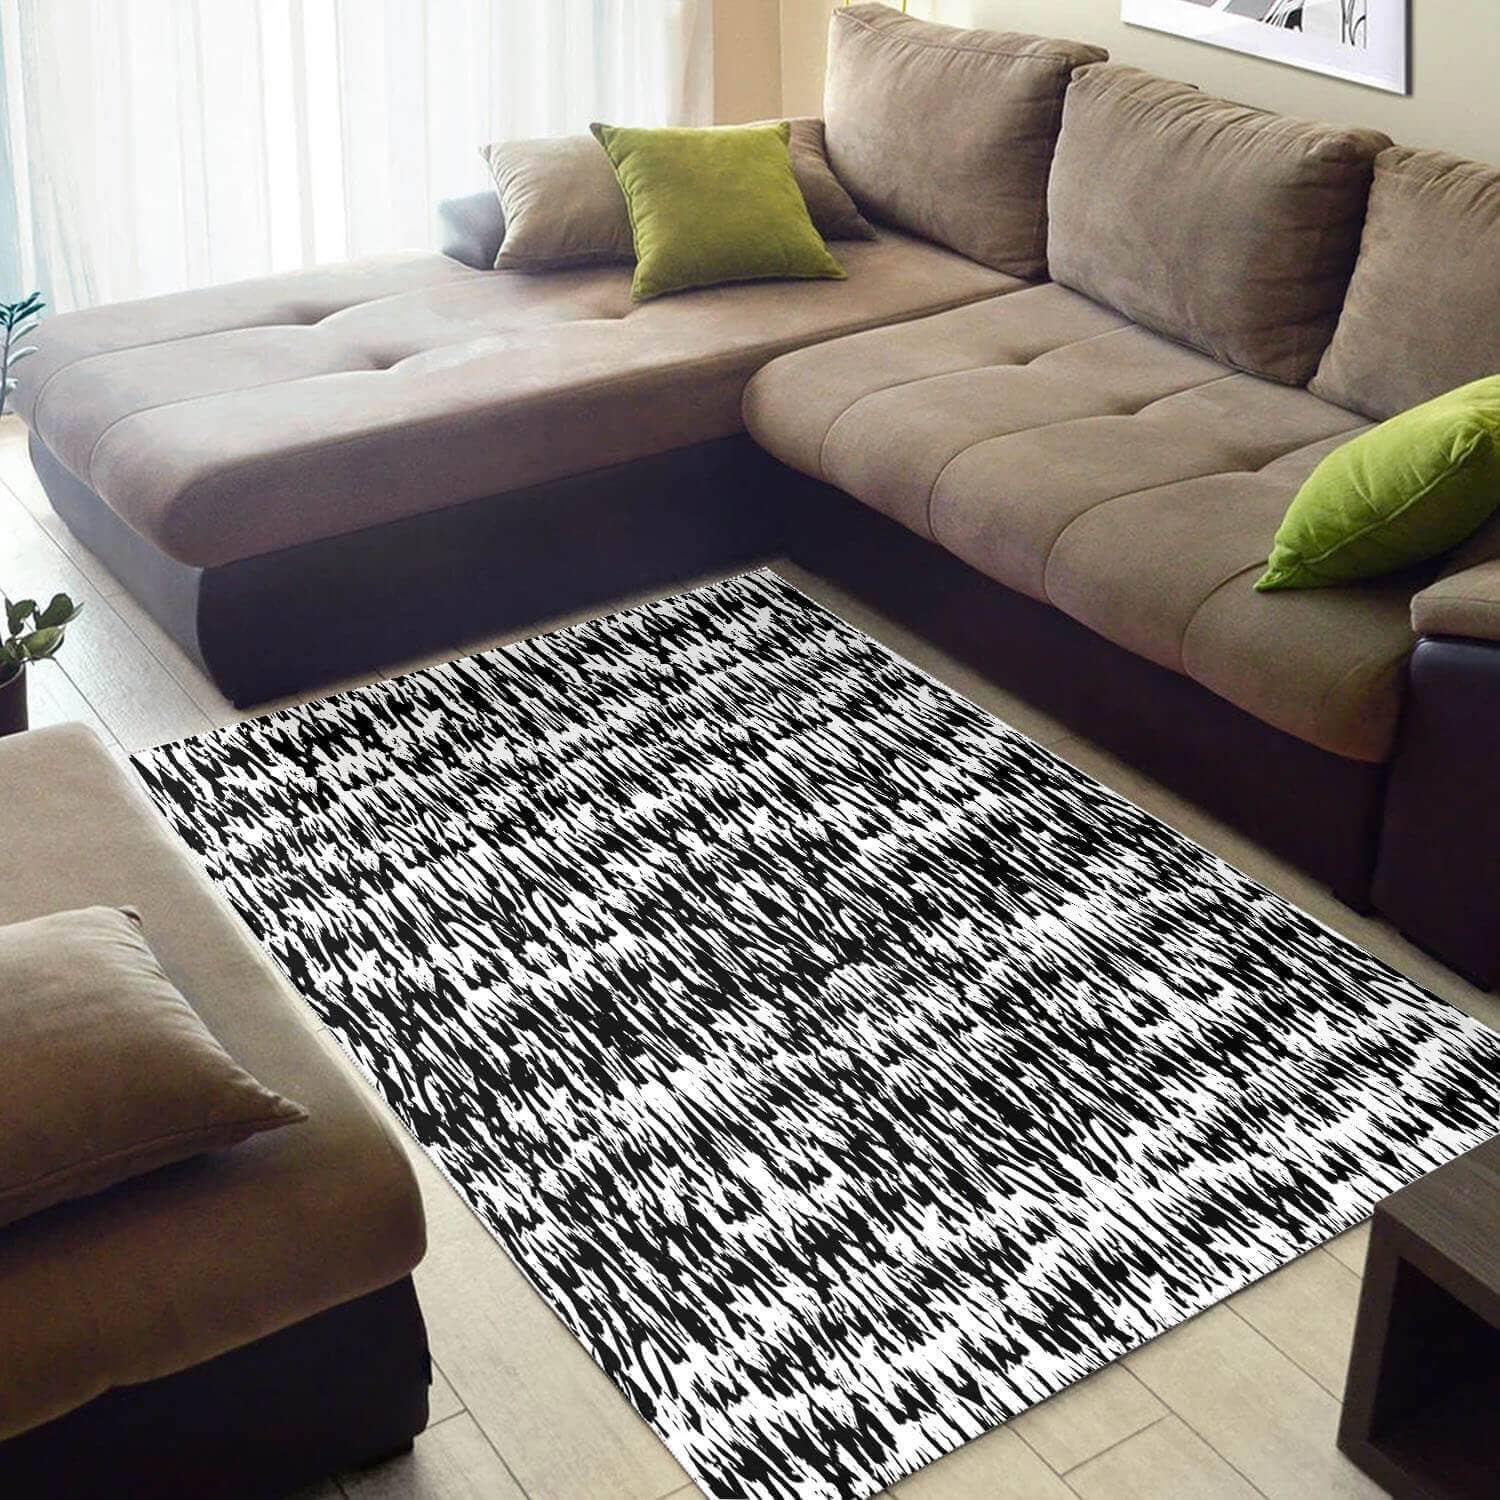 Inspired African Style Retro American Art Ethnic Seamless Pattern Floor Home Rug